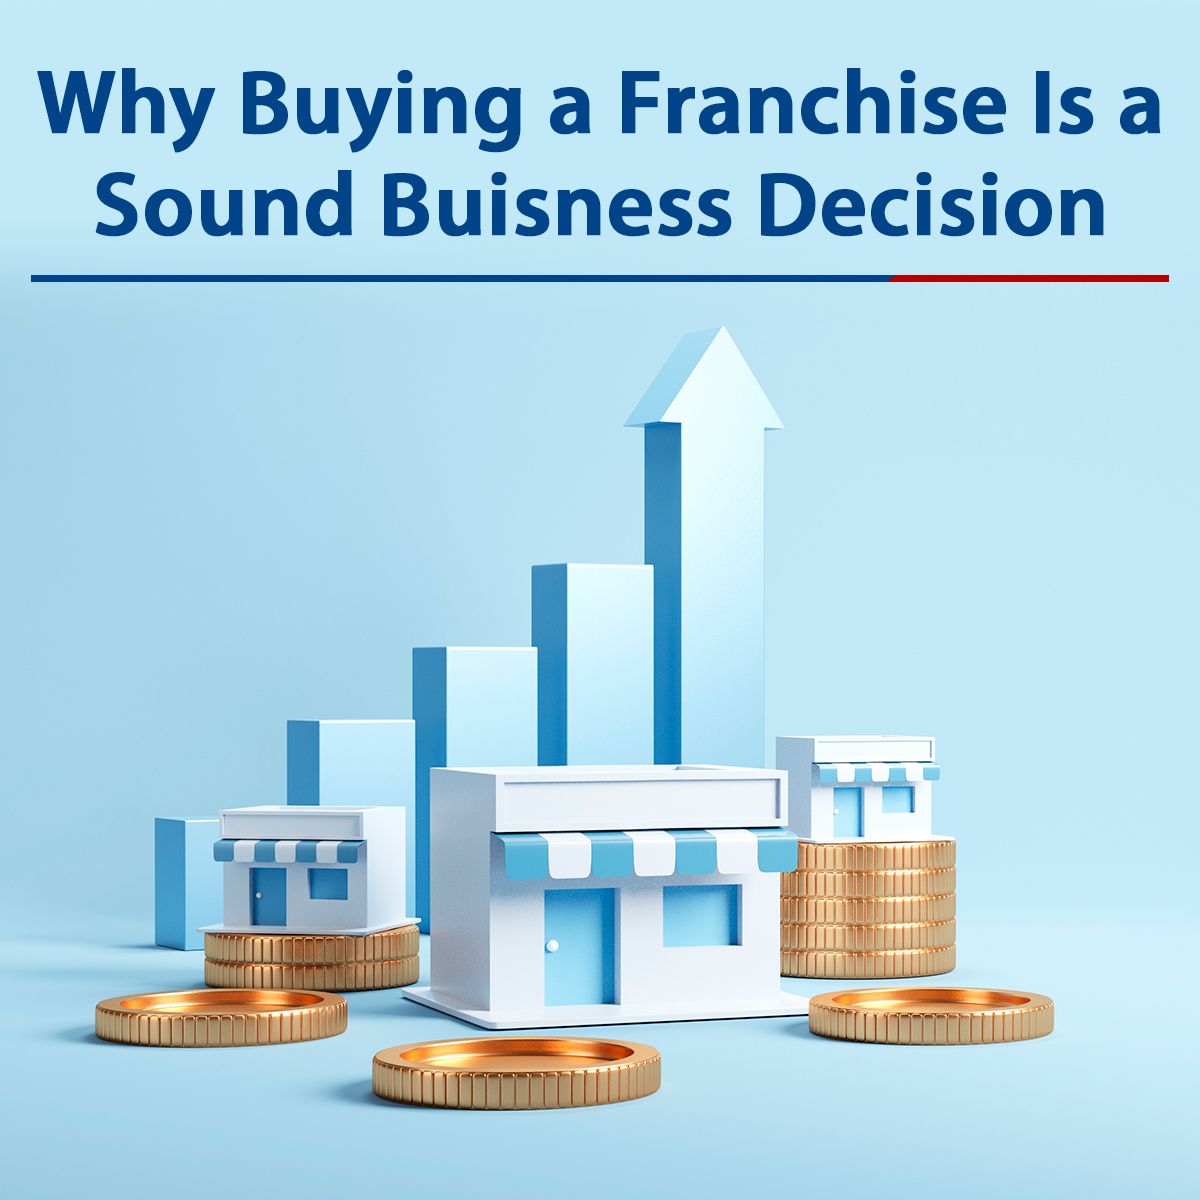 Why Buying a Franchise Is a Sound Buisness Decision